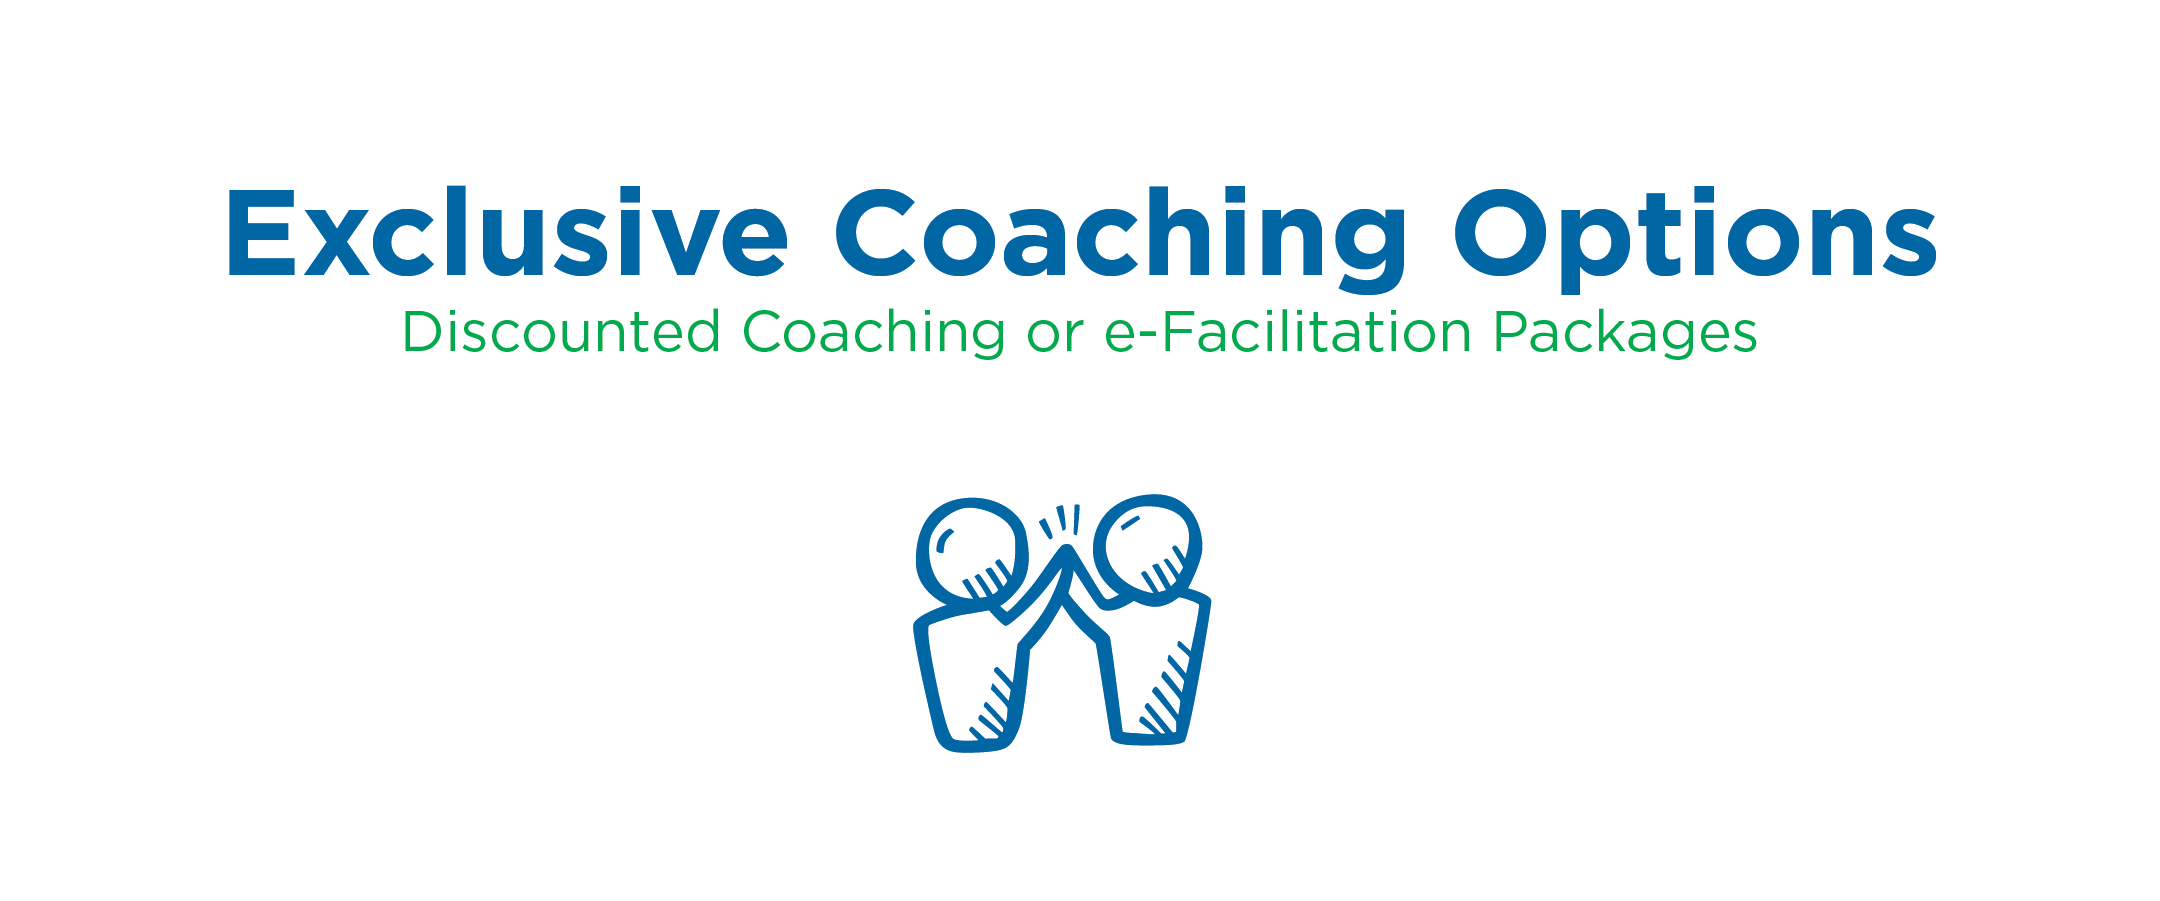 Exclusive Coaching Options: Discounted Coaching or e-Facilitation Packages